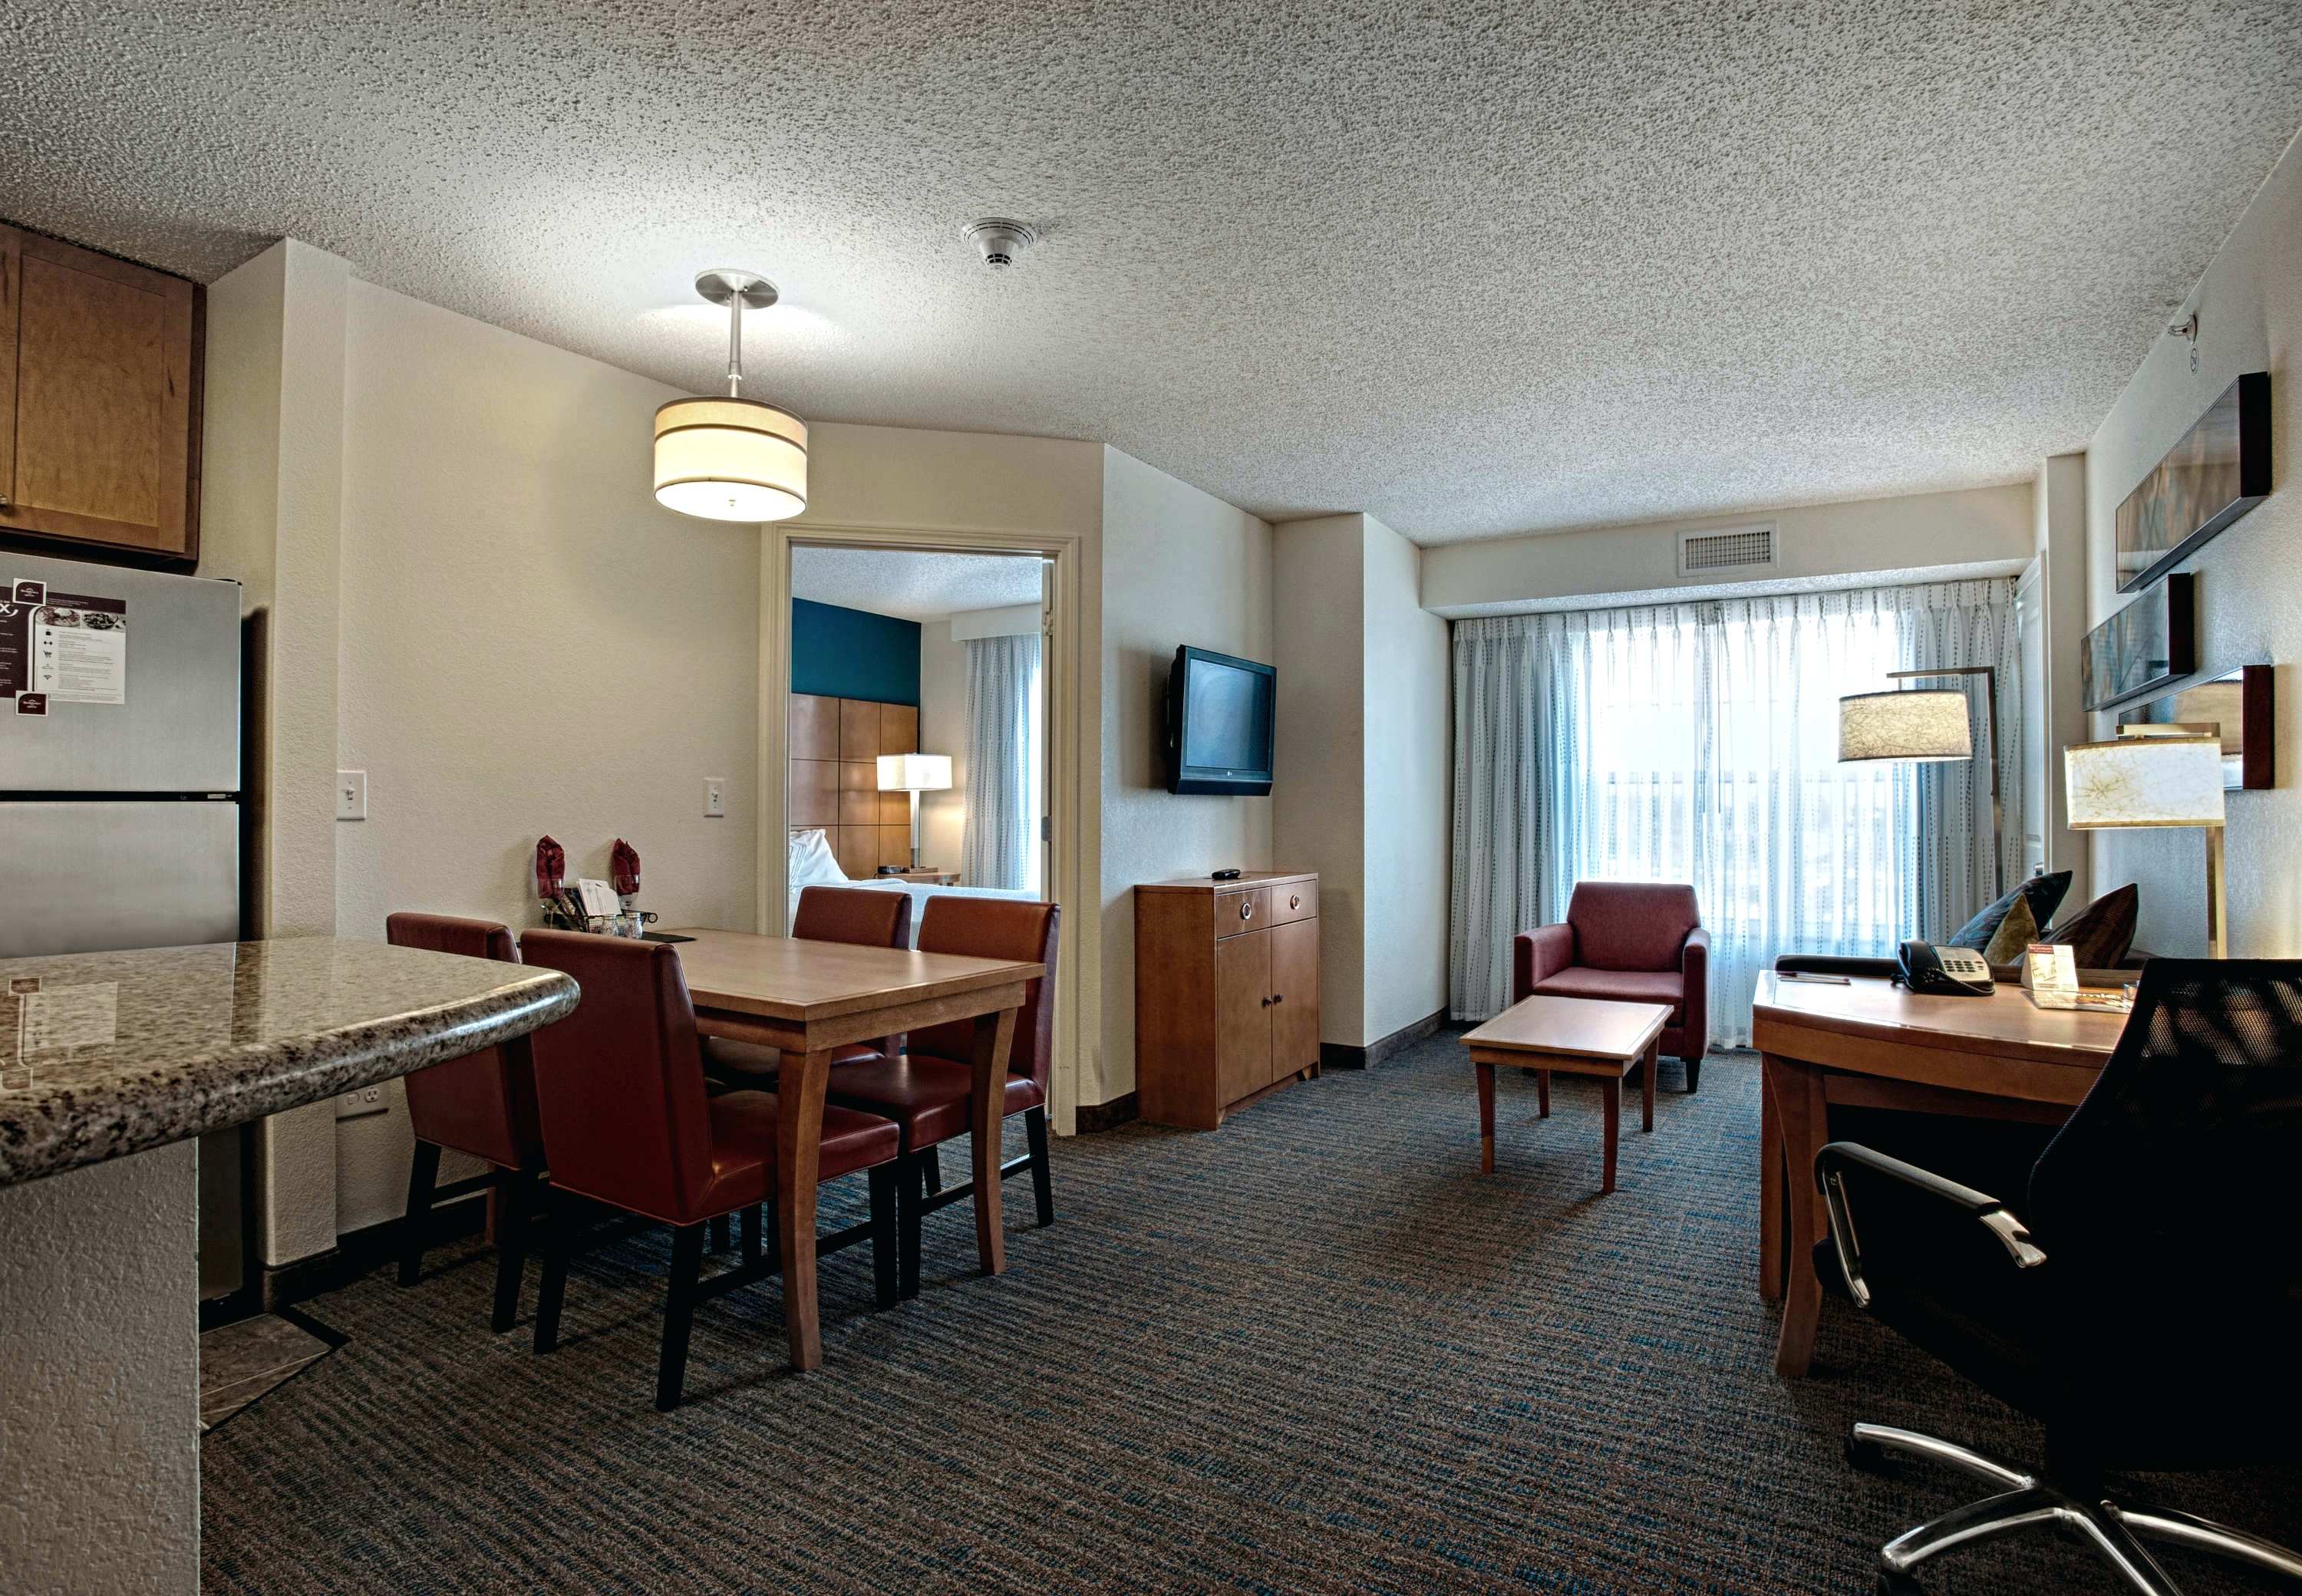 Atlantic City Room Rates City Suites Hotels In Egg Harbor Township ...